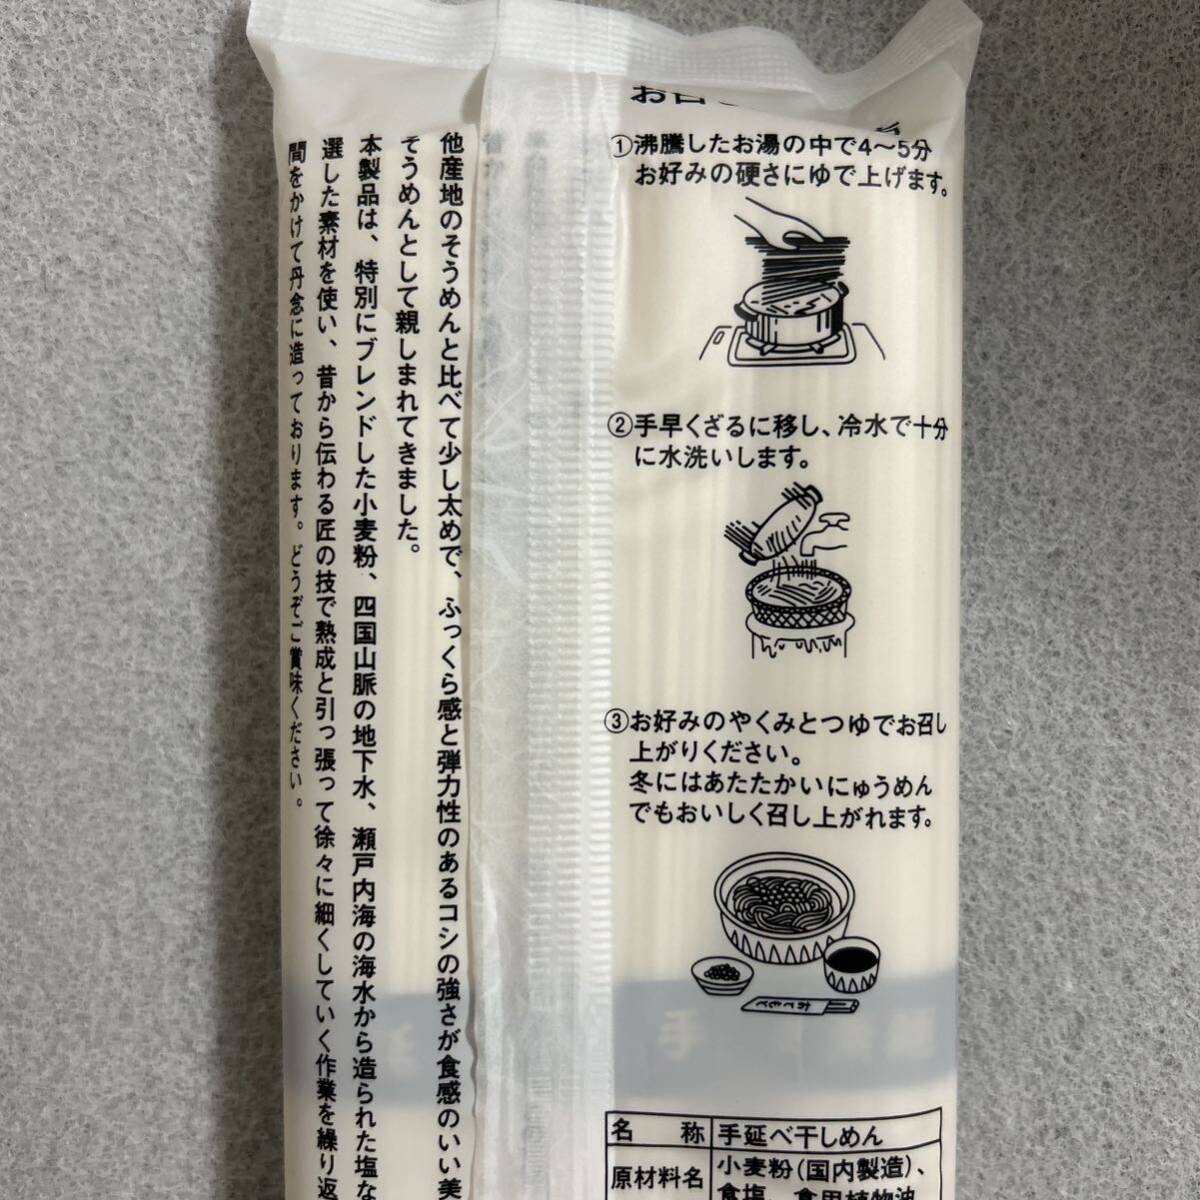  Tokushima name production half rice field hand .. vermicelli 300g×3 sack set half rice field element noodle 